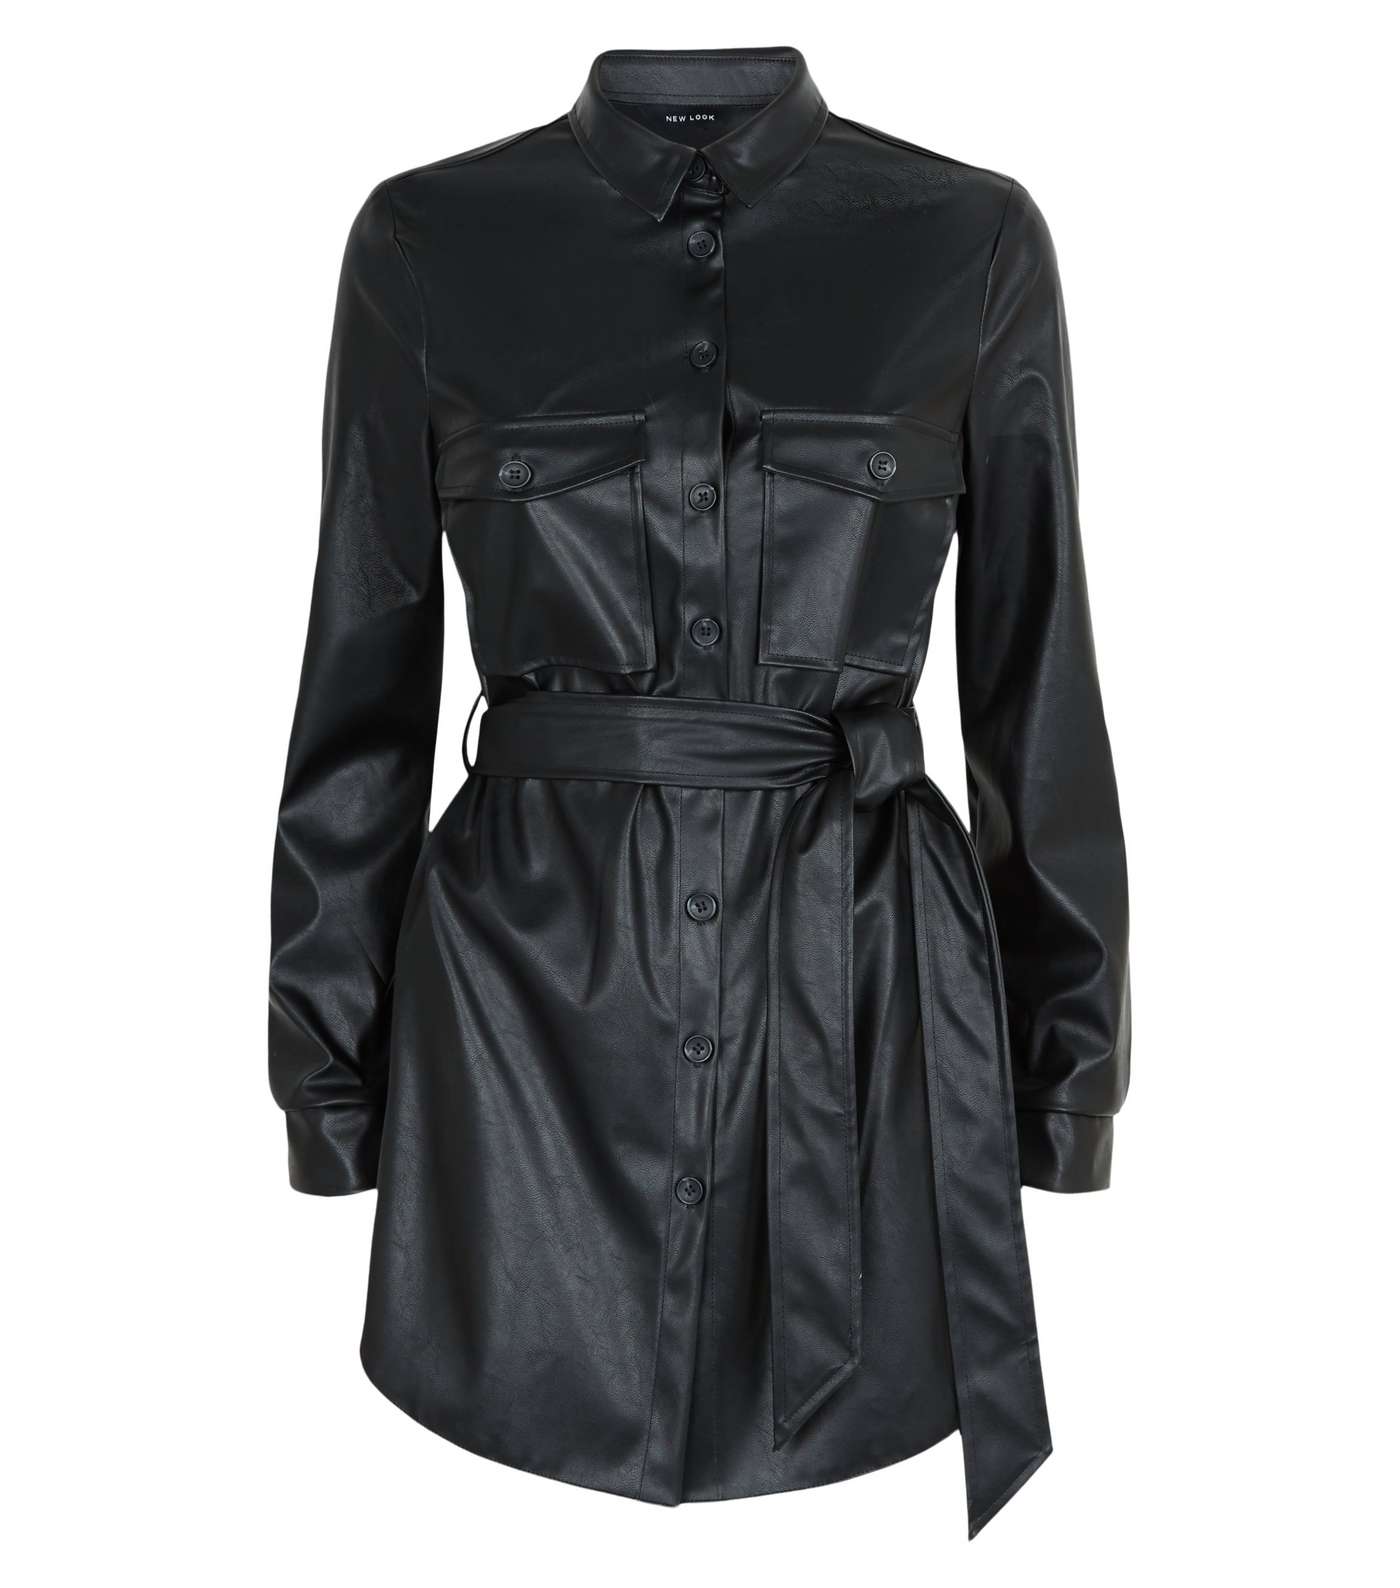 Black Leather-Look Belted Shirt Image 4